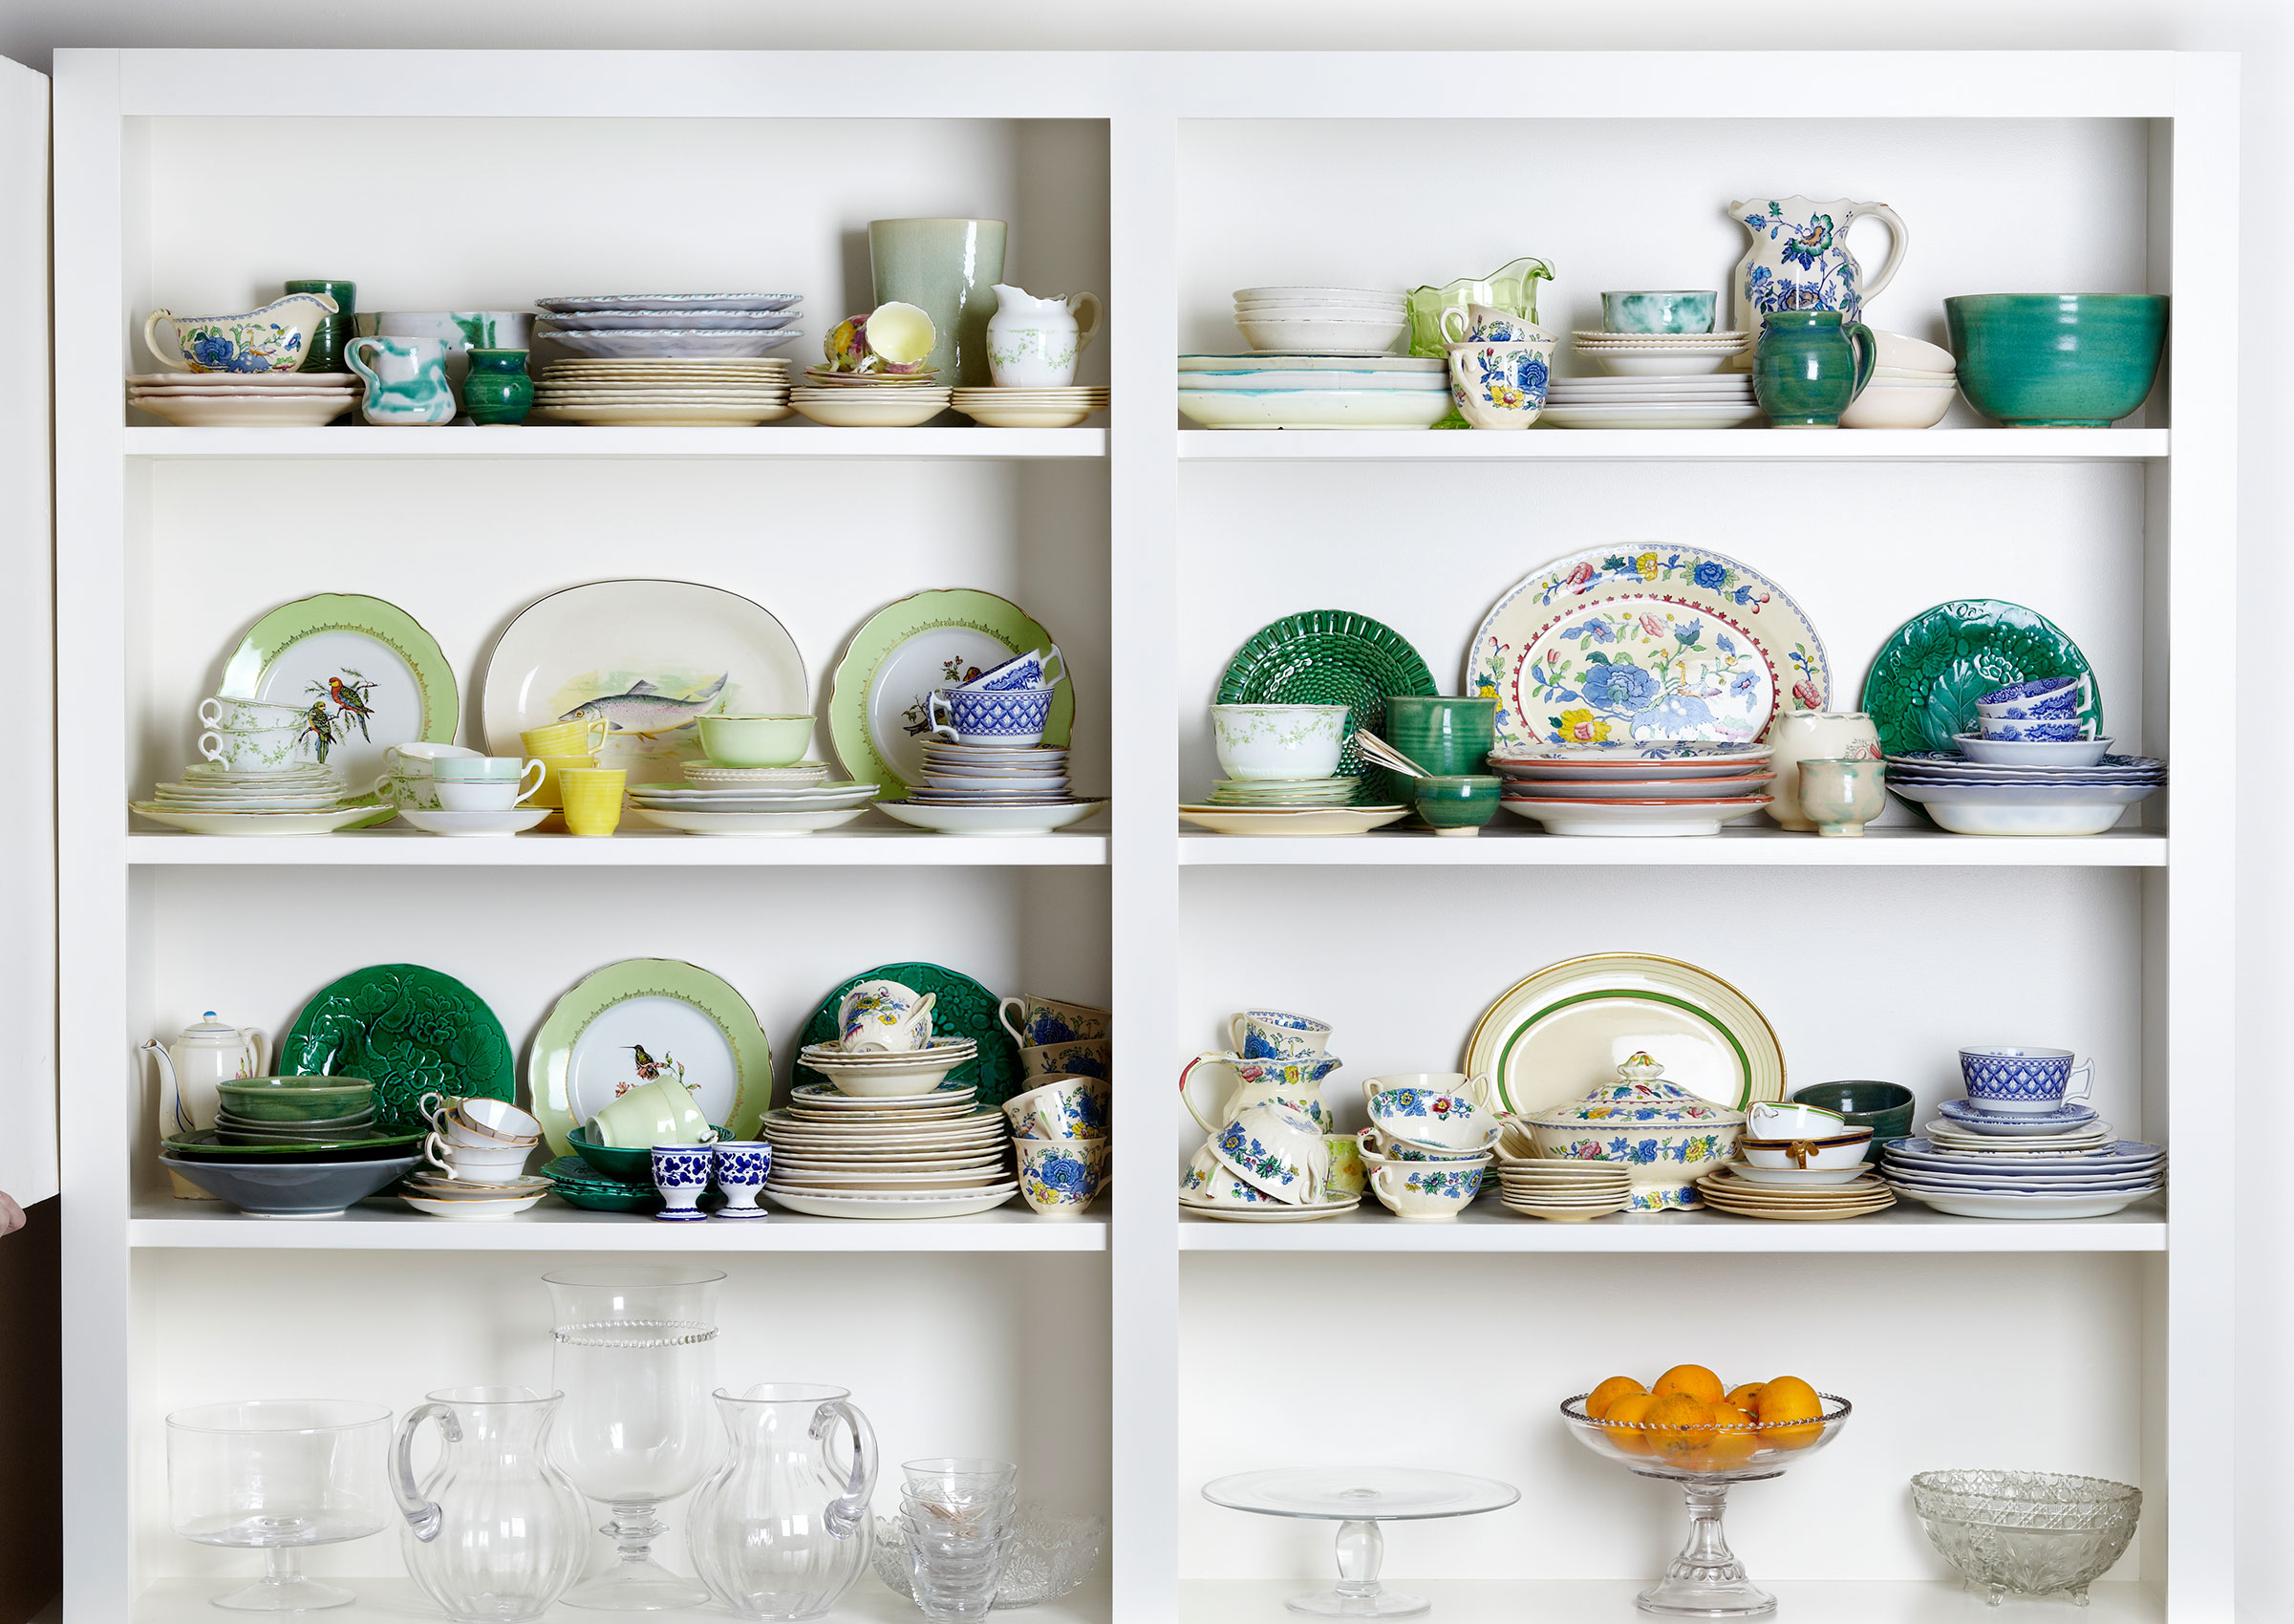 Free Range in the City • Antique New Zealand Tableware on White Shelf • Cookbook & Lifestyle Food Photography